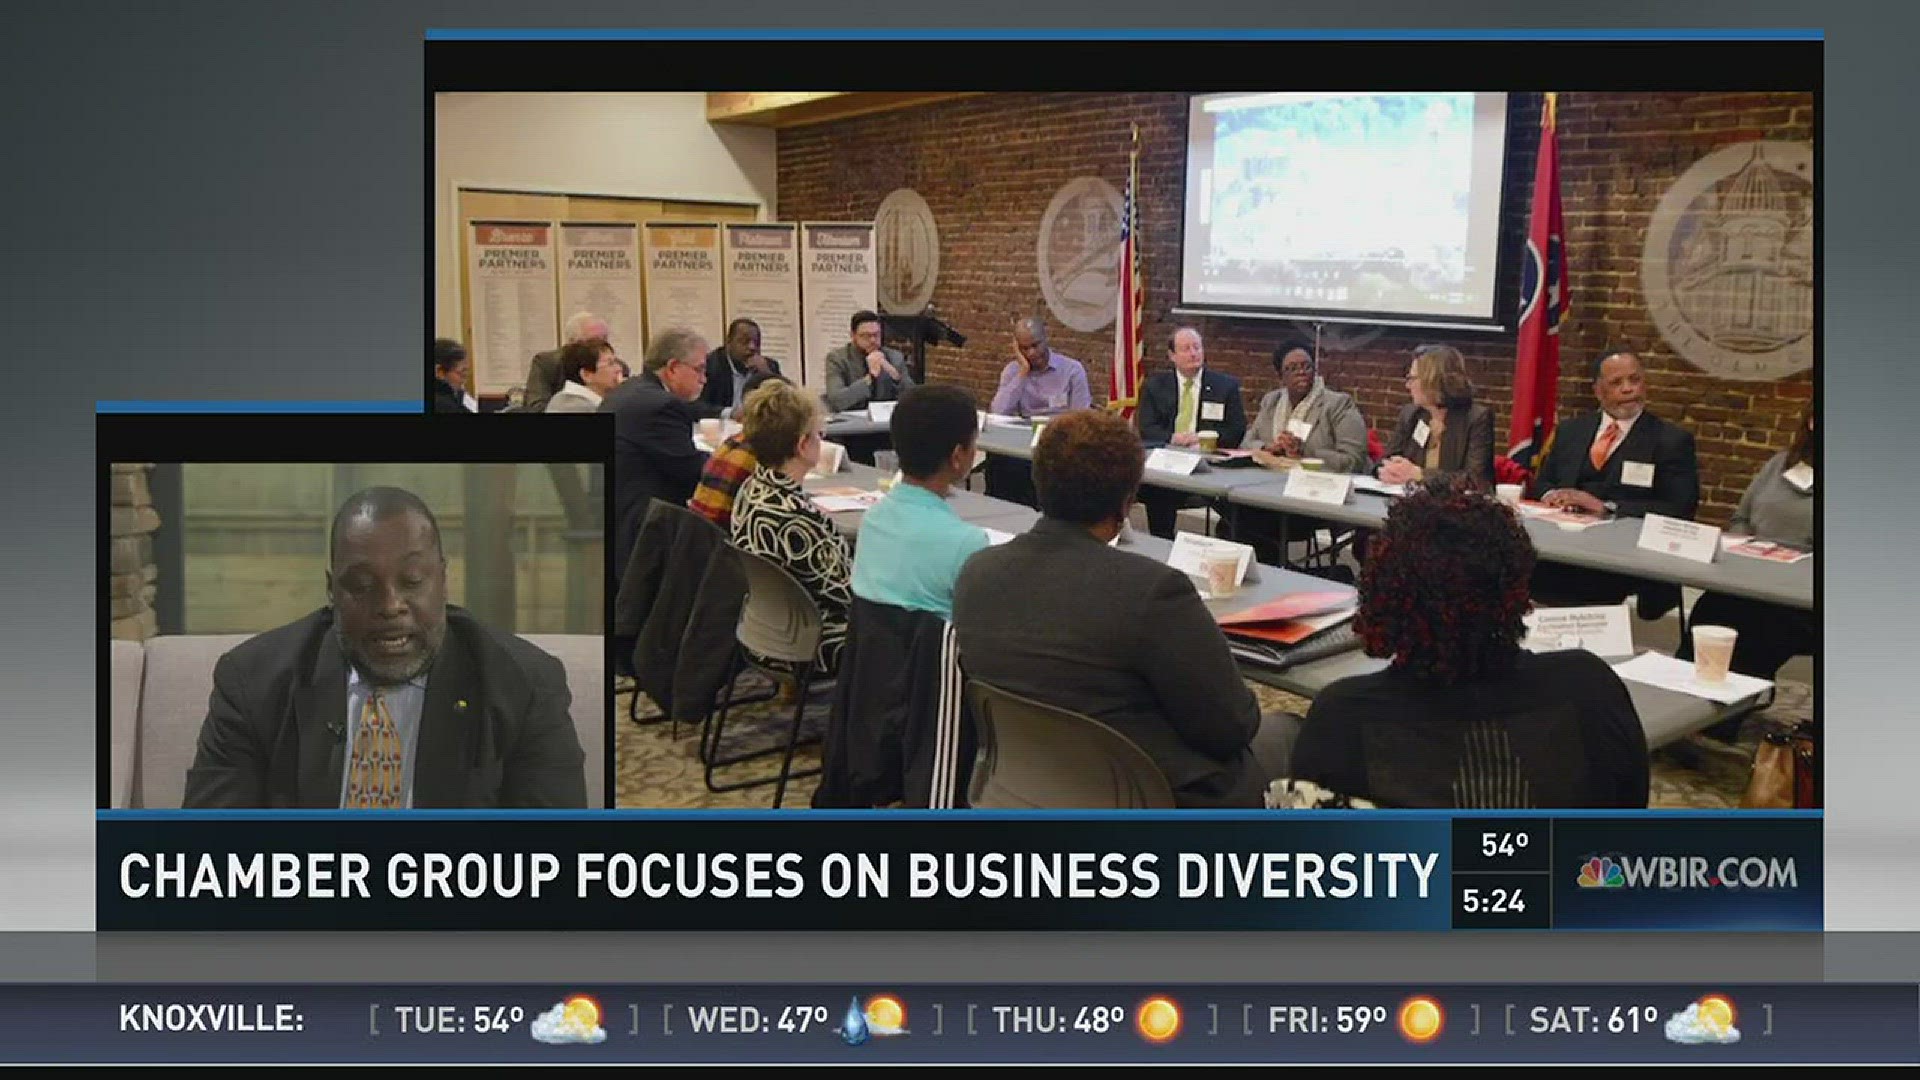 An initiative by the Knoxville chamber is helping business leaders create an inclusive work environment.